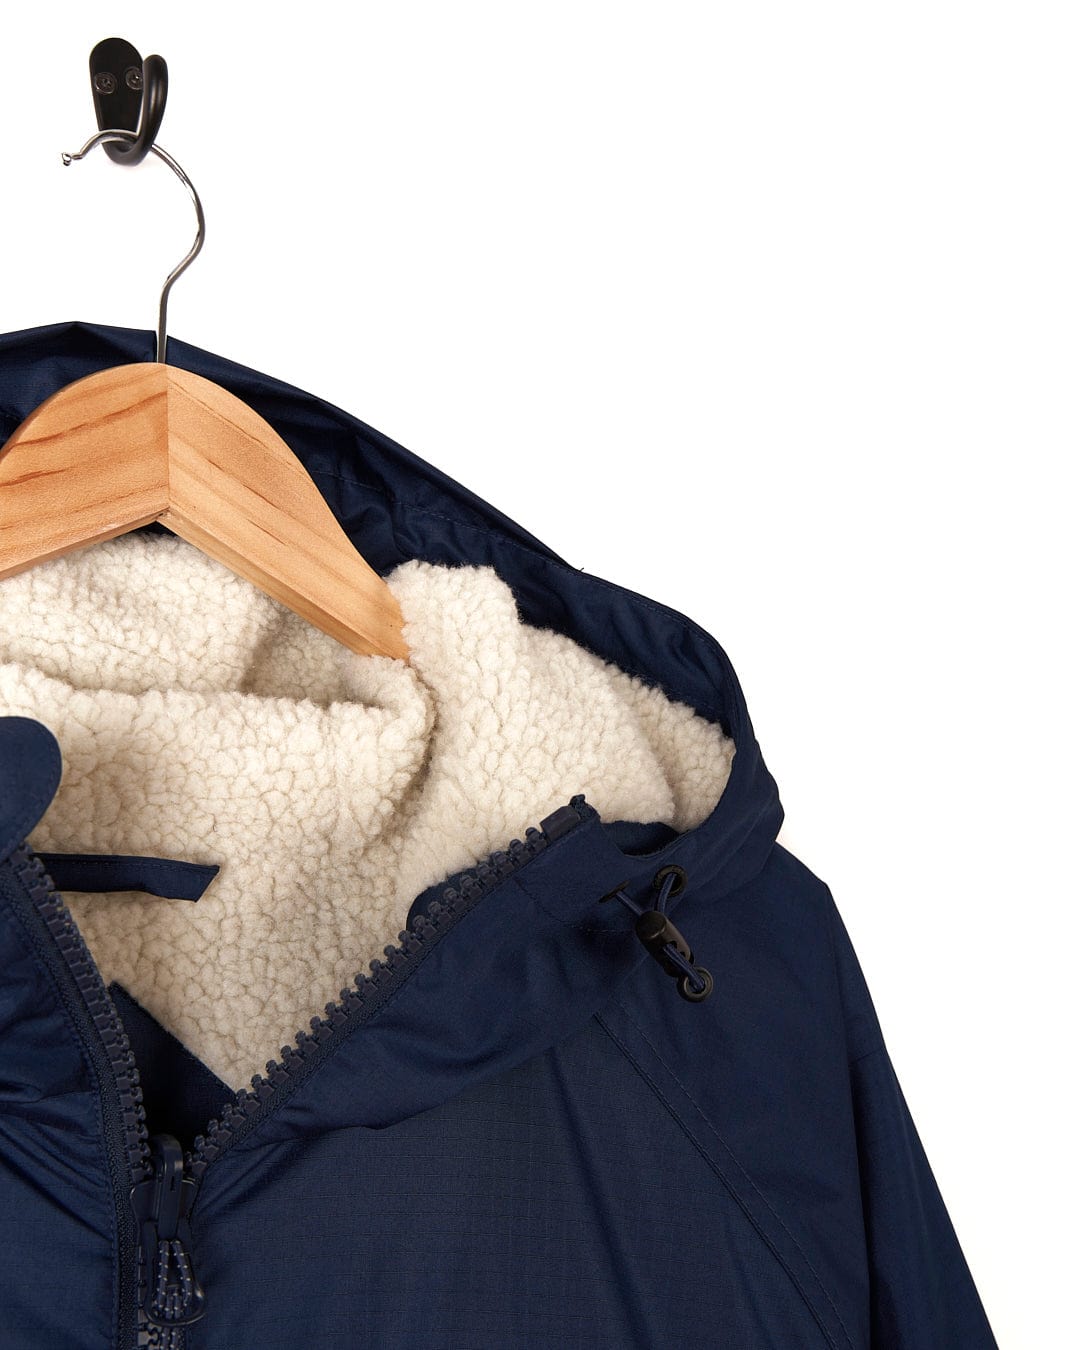 A Saltrock Four Seasons - Waterproof Changing Robe - Blue with a sherpa lining hanging on a hanger.